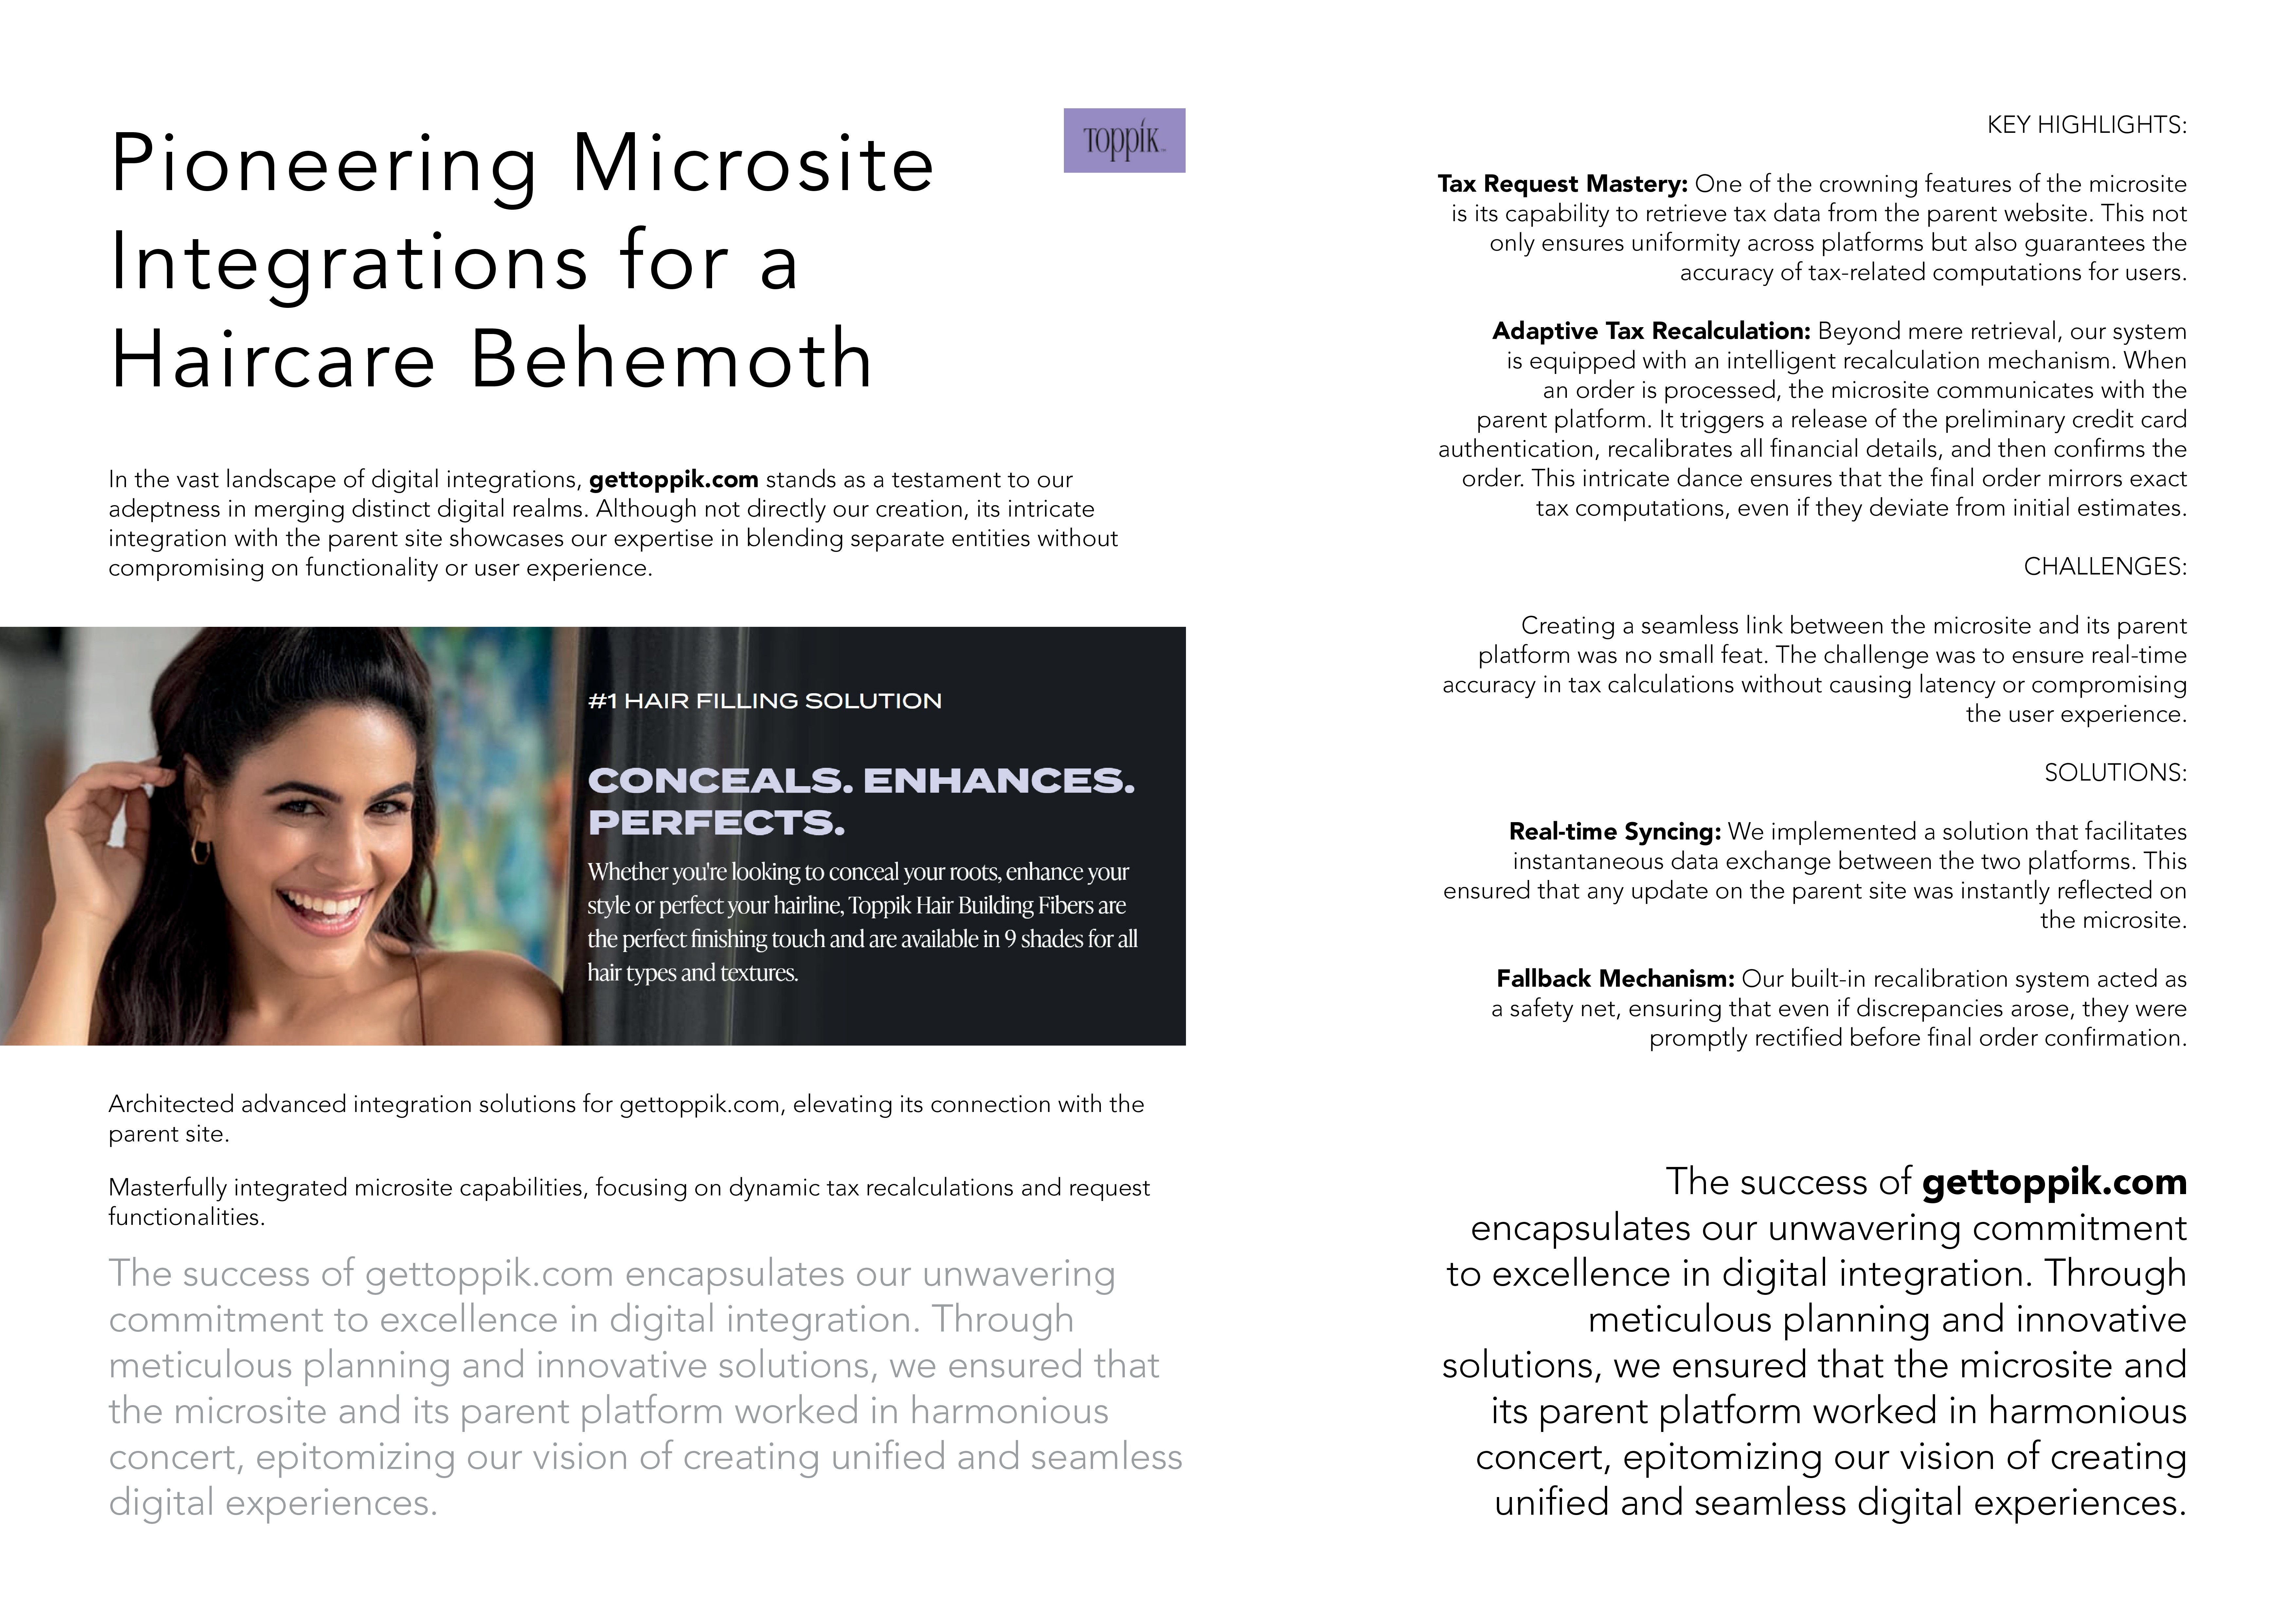 Pioneering Microsite Integrations for a Haircare Begemoth